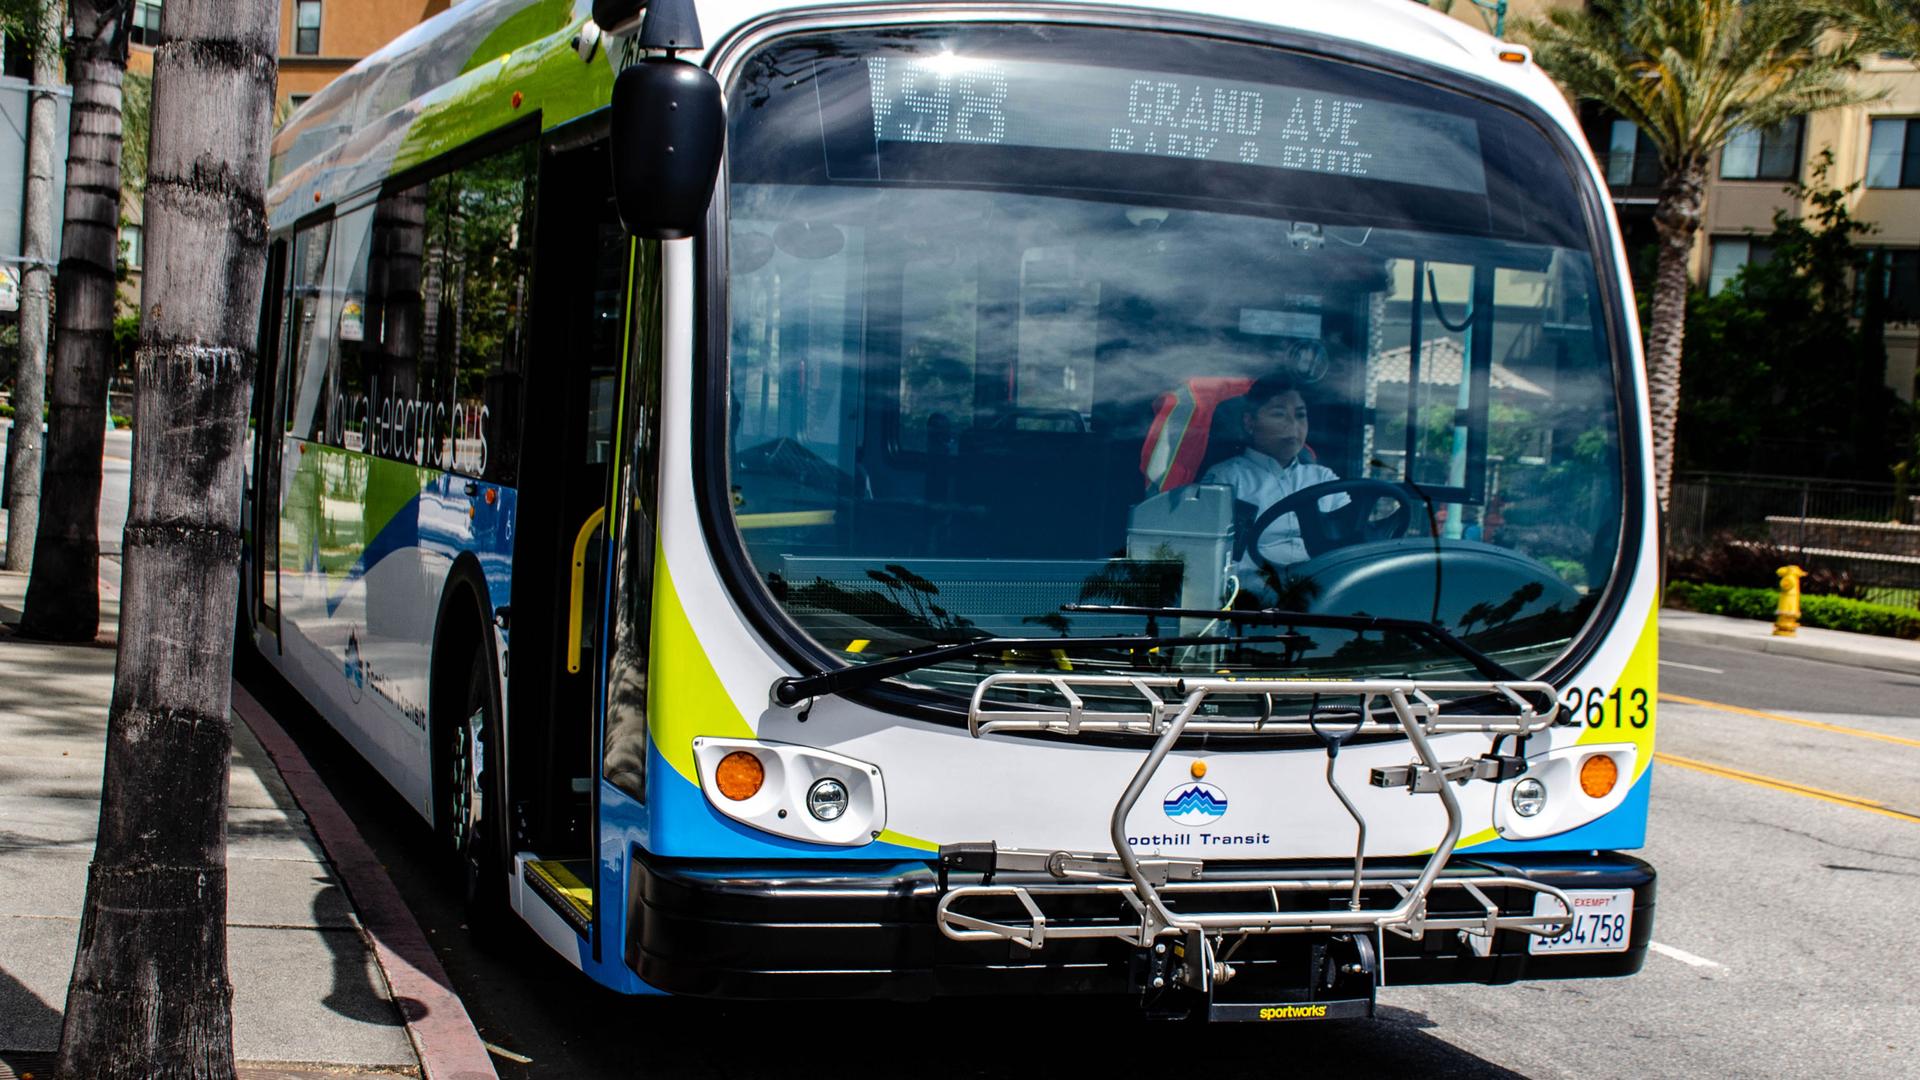 The front of an electric bus is shown with green, blue and white stripes.